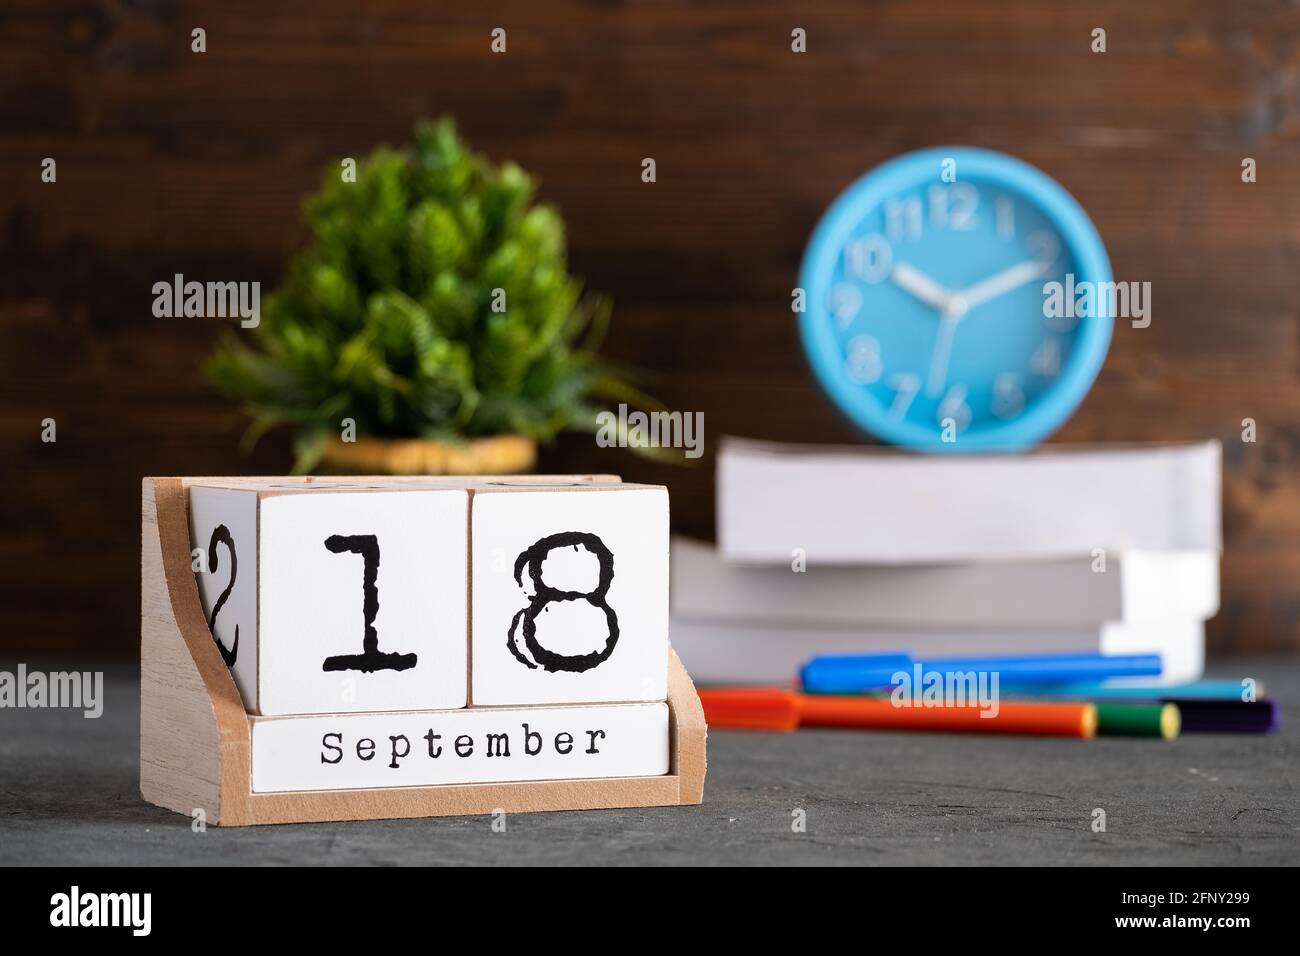 September 18th. September 18 wooden cube calendar with blur objects on background. Stock Photo